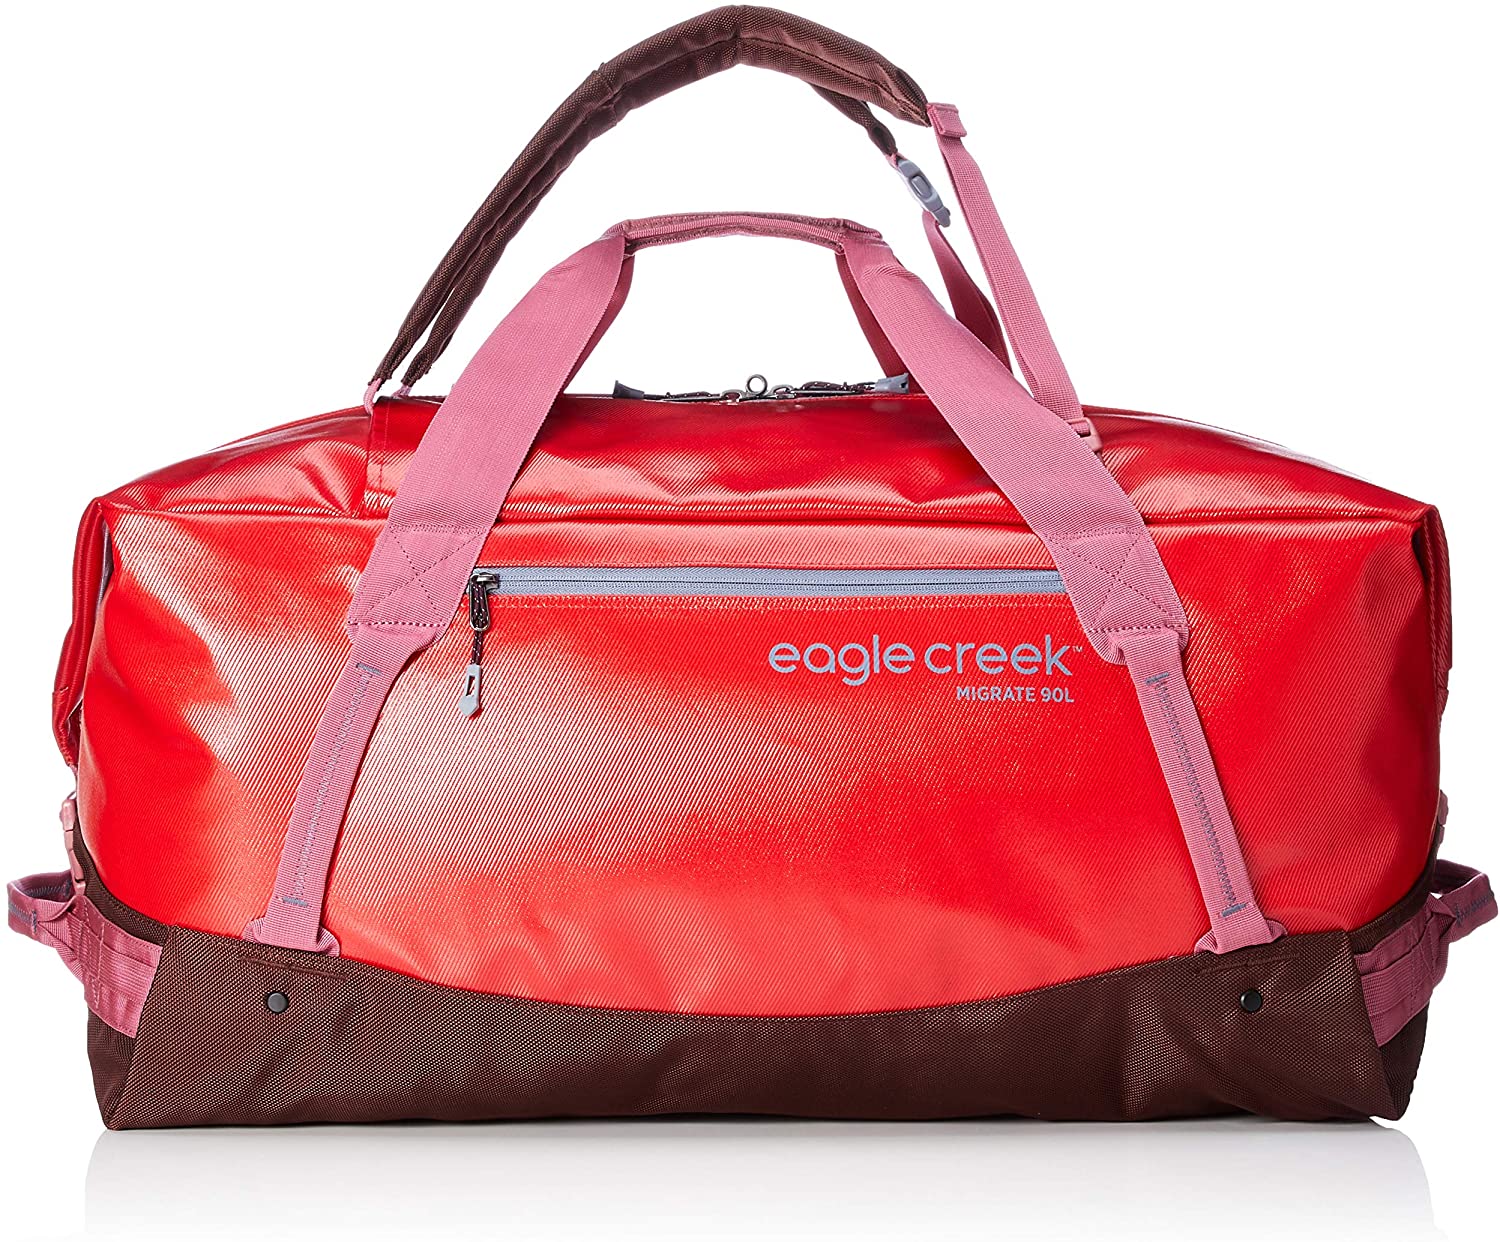 Eagle Creek Migrate Duffel 90 Liters in Coral Sunset color from the front